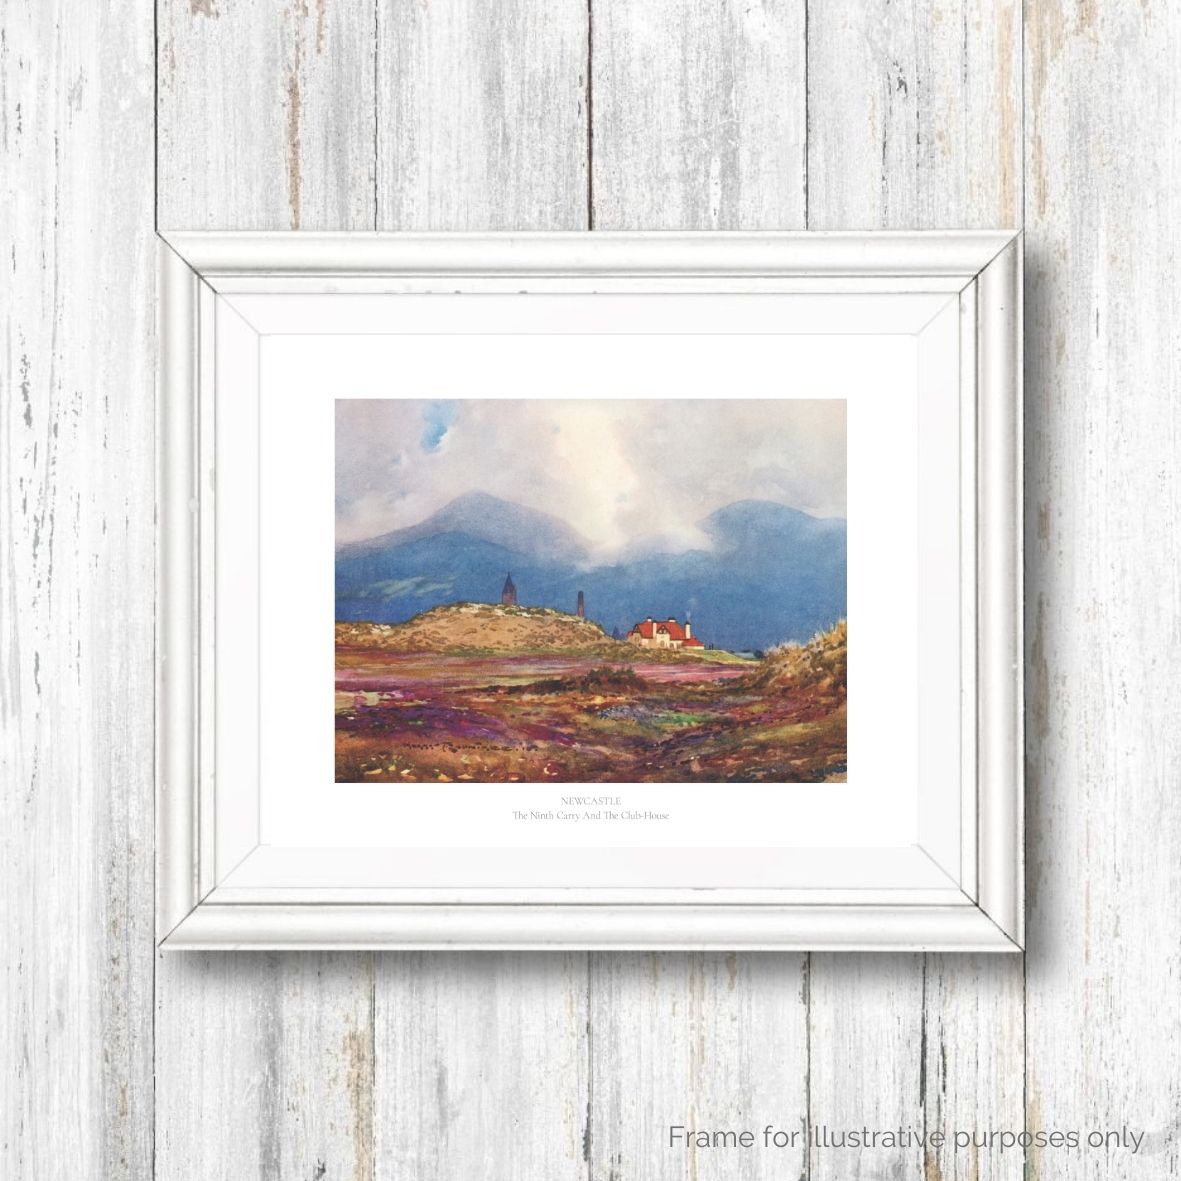 Royal County Down Golf Club framed print with text by Harry Rountree